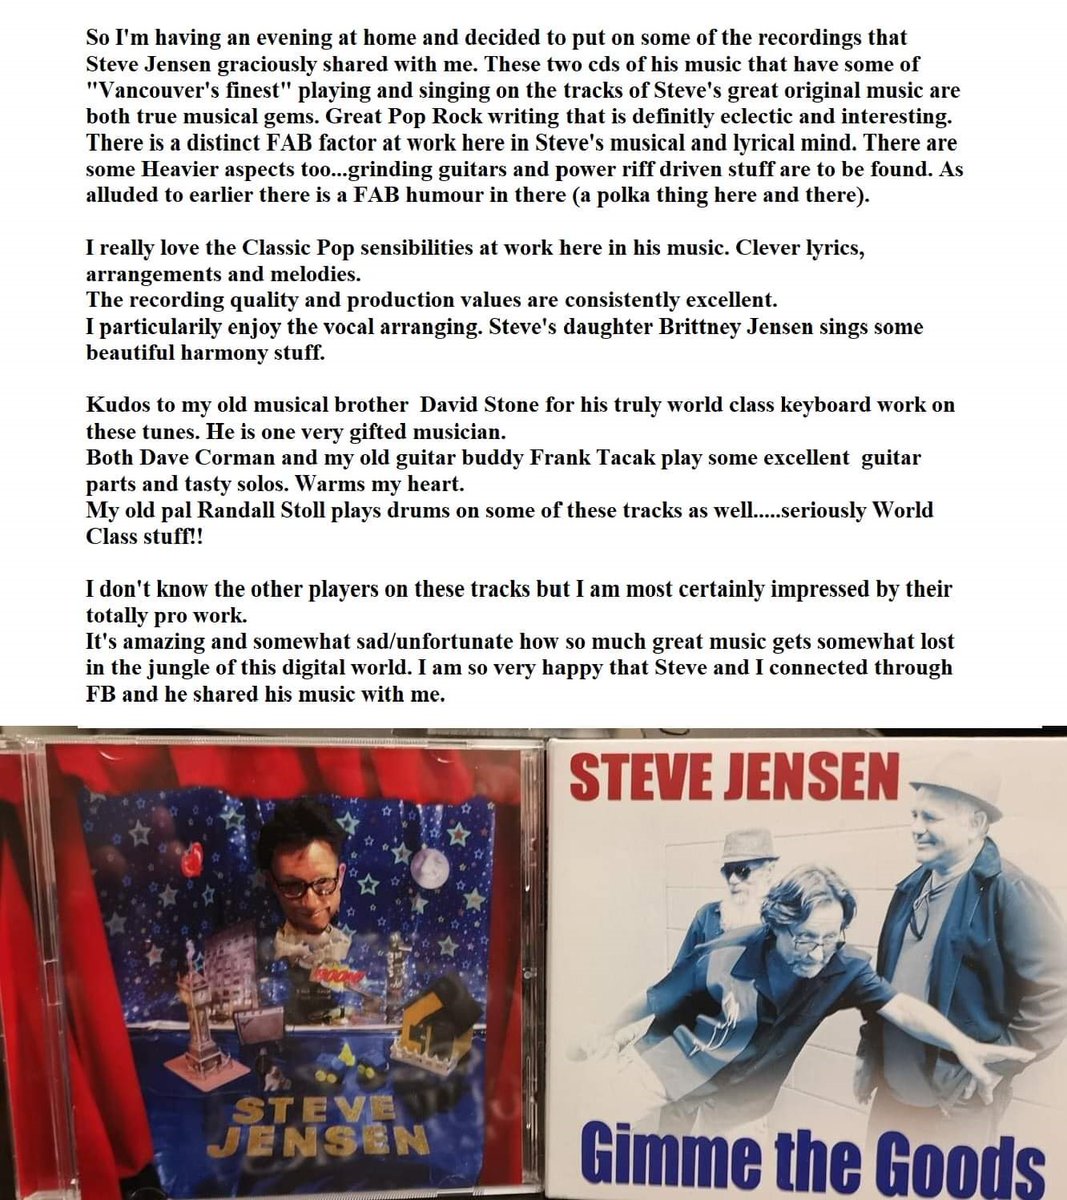 #MusicFamily>>>#GetALoadOfThis# Updated #PowerPacked #Review>>#For>>>#SteveJensen @Scuzzoe

@cookingmama48>>
@Evey01701192
#JensenProudWifePomotions

#NewMusicComingSoon
#NowThatsWhatImTalkinAbout!!